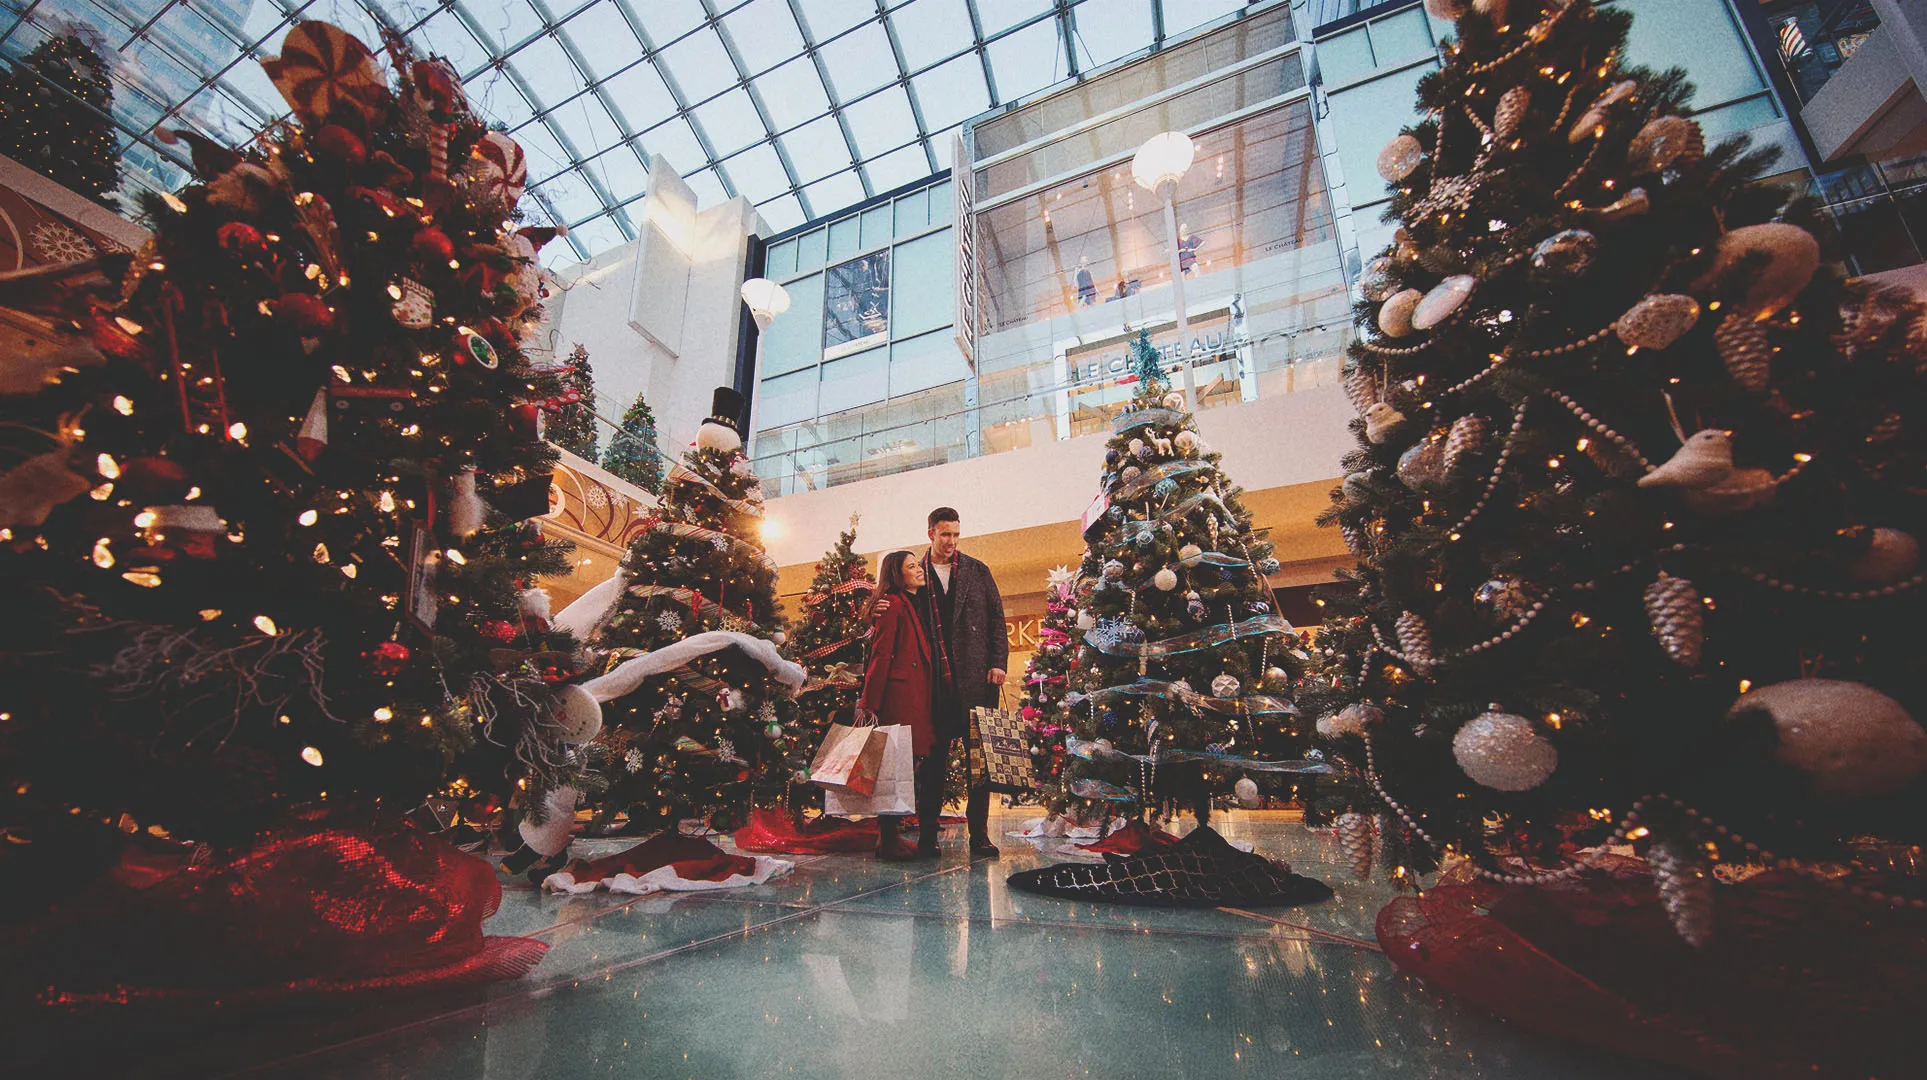 couple admiring a Christmas tree display at a shopping centre in downtown Calgary